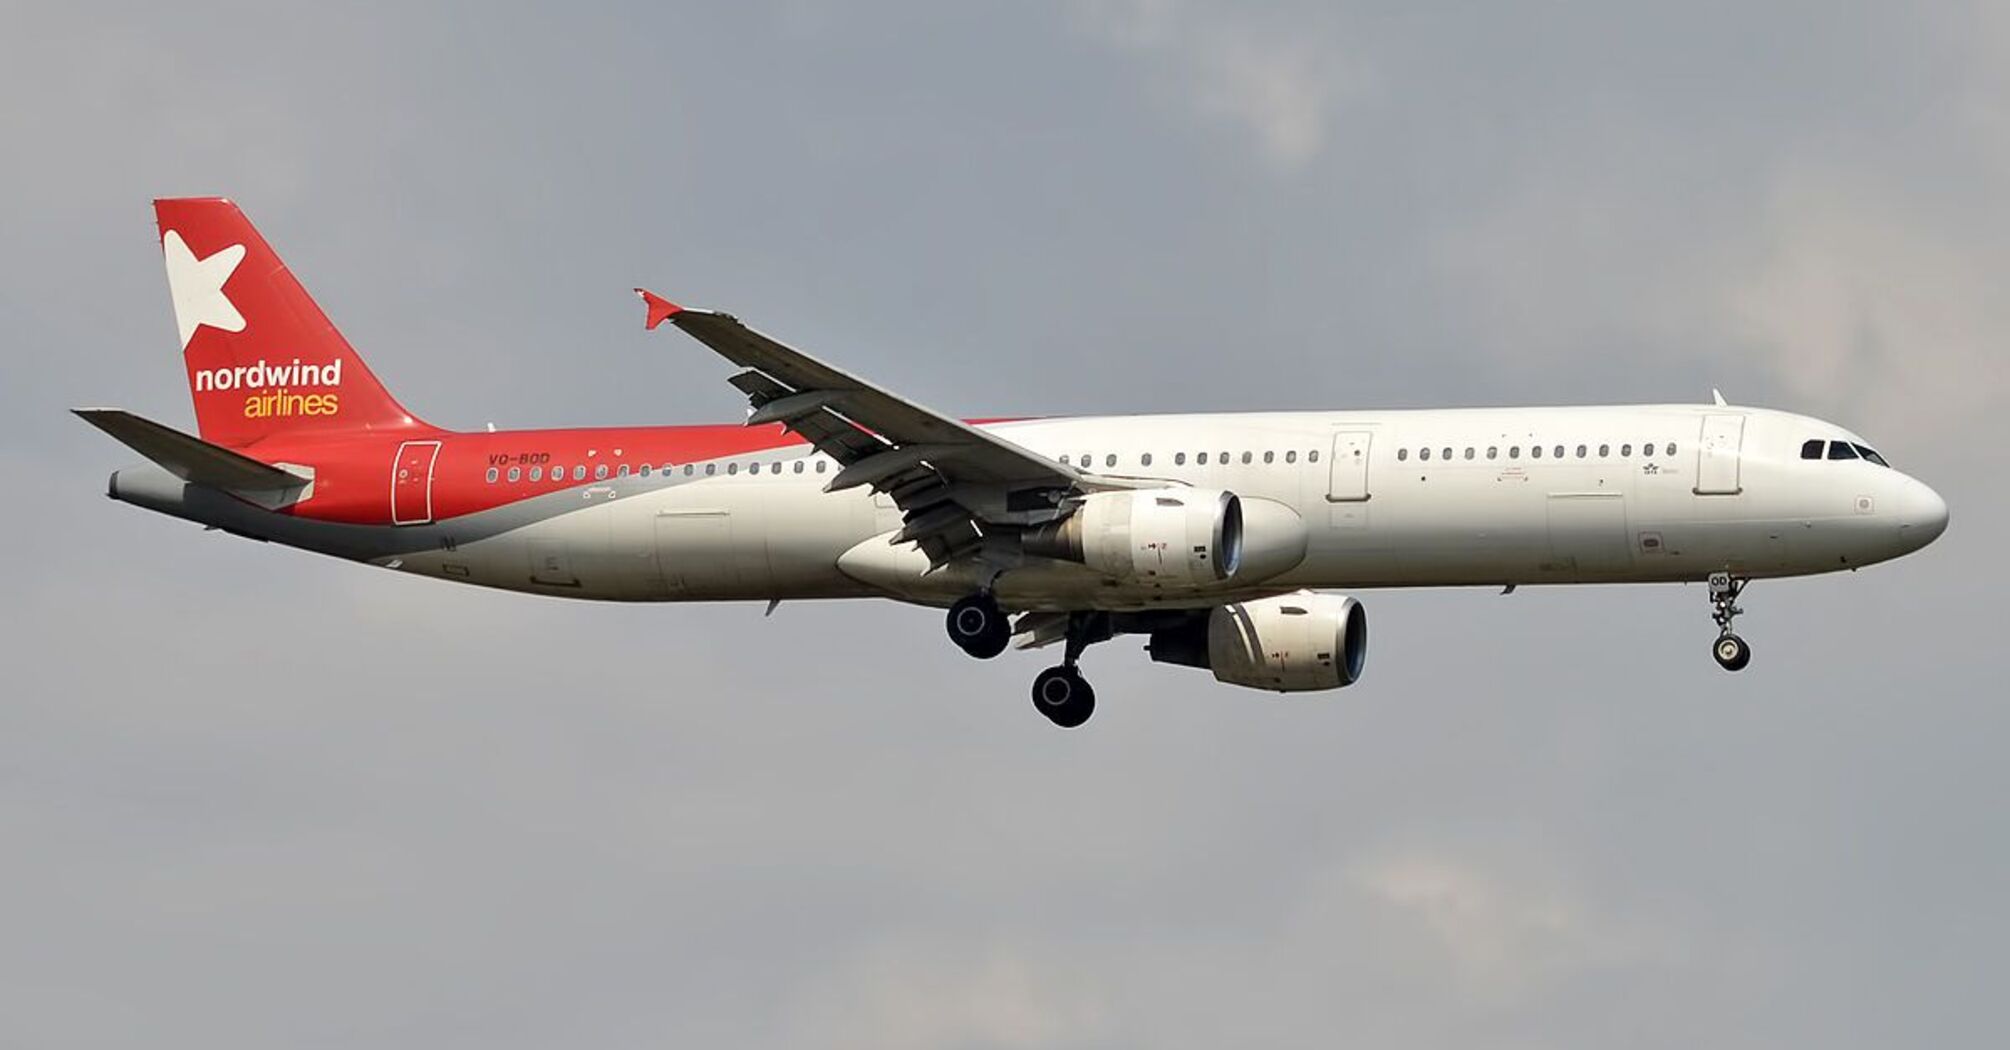 Nordwind Airlines Compensation for Delayed or Cancelled Flights